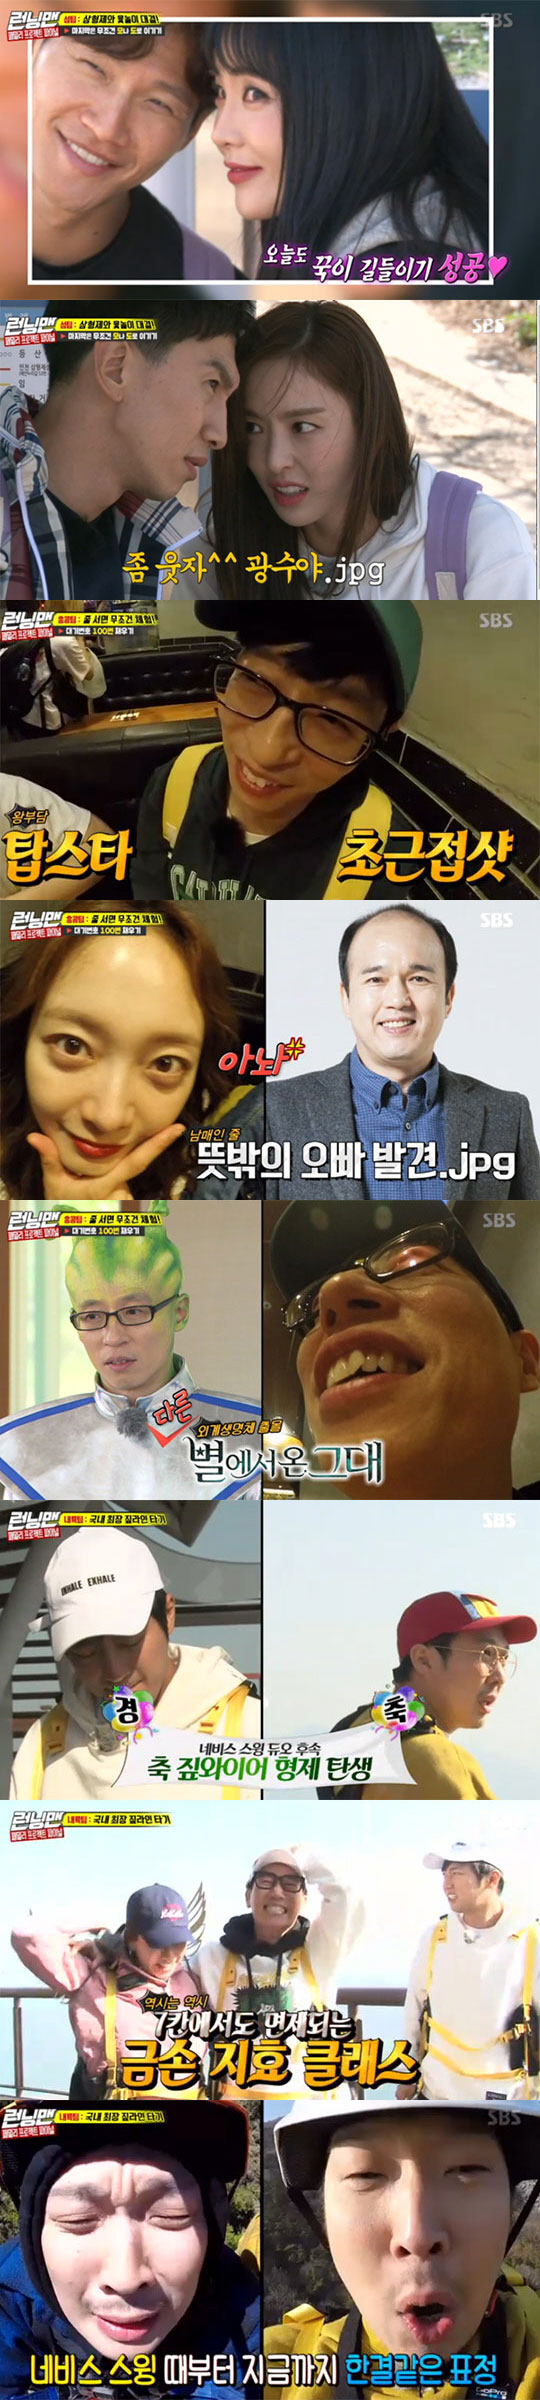 Running Man Lee Da-hee and Lee Kwang-soo and Yoo Jae-Suk finally proved Kangson.Hong Jin-young and Kim Jong-kook were on a good Switzerland luxury trip.On the 13th, SBS Running Man held the Family Global Package Project final race with Lee Da-hee - Lee Sang-yeob - Kang Han-Na - Hong Jin-young.As a result of the broadcast, the final member of Global Luxury vs Body Surrounding Travel was decided.Kim Jong-kook visited Lee Da-hee - Lee Kwang-soo - Hong Jin-young and Shinshimodo and Top Model on the yunori mission with the three brothers.Lee Da-hee told Kim Jong-kook, Hong Jin-young or luxury?, and Hong Jin-young bounced, saying, My brother is desperate for me. But Kim Jong-kook was countered by Im a style that women tell to go if they dont be desperate.Kim Jong-kook then revealed that Hong Jin-young had called him in the middle of the night.Hong Jin-young made an atmosphere of taking pictures together at the bus stop and demanded Andre Kim pose reminiscent of wedding photography at Kim Jong-kook.Kim Jong-kook smiled and accepted: in contrast to Lee Kwang-soo - Lee Da-hee, who ransacked each other.They played yutnori with three Shimodo residents.Lee Kwang-soos bangs were followed by a series of bangs, but Lee Da-hee and Kim Jong-kook won the Running Man team.Yoo Jae-Suk and Jeon So-min, Kang Han-Na and Yang Se-chan went on a Hong Kong restaurant tour under the condition that more than 10 people line up; the start was good.The local popularity of Yoo Jae-Suk was great, and Yoo Jae-Suk, Jeon So-min and Kang Han-Na were cheerful with each other taking humiliating shots.But on that day, Yoo Jae-Suk showed a sense of extreme shooting.There was no one in every place Yoo Jae-Suk pointed out, recalling the memories of his past trip to Hong Kong, and even the crowded streets were under construction.Jeon So-min complained, Yoo Jae-Suk brother or Jung PD seems to be unlucky, and Kang Han-Na also said, It was really not fun.The Hong Kong team had to return without any success in the timeout.Haha and Ji Seok-jin - Song Ji-hyo - Lee Sang-yeob top model on the longest distance (about 3km) zip line in Asia in Hallyeo-do.Haha and Lee Sang-yeob were destined to get on the zipline, contrasting the terrified Haha and the pleasantly enjoyed Lee Sang-yeob.The fourth week of the luxury sticker was attached, and the final roulette to determine the body, luxury destination and traveler was turned.Luxury venues were Switzerland Snow Kingdom Healing Tour, while the body-sick spot was the British Ghost Hotel.The final result was the first week list: Hahas finalist Jihyo Sechan Hanna Jin-jin became a luxury, and Jaeseok Seokjin Gwangsu Min-soo Sang-yeop Dahee became a shuddering partner.